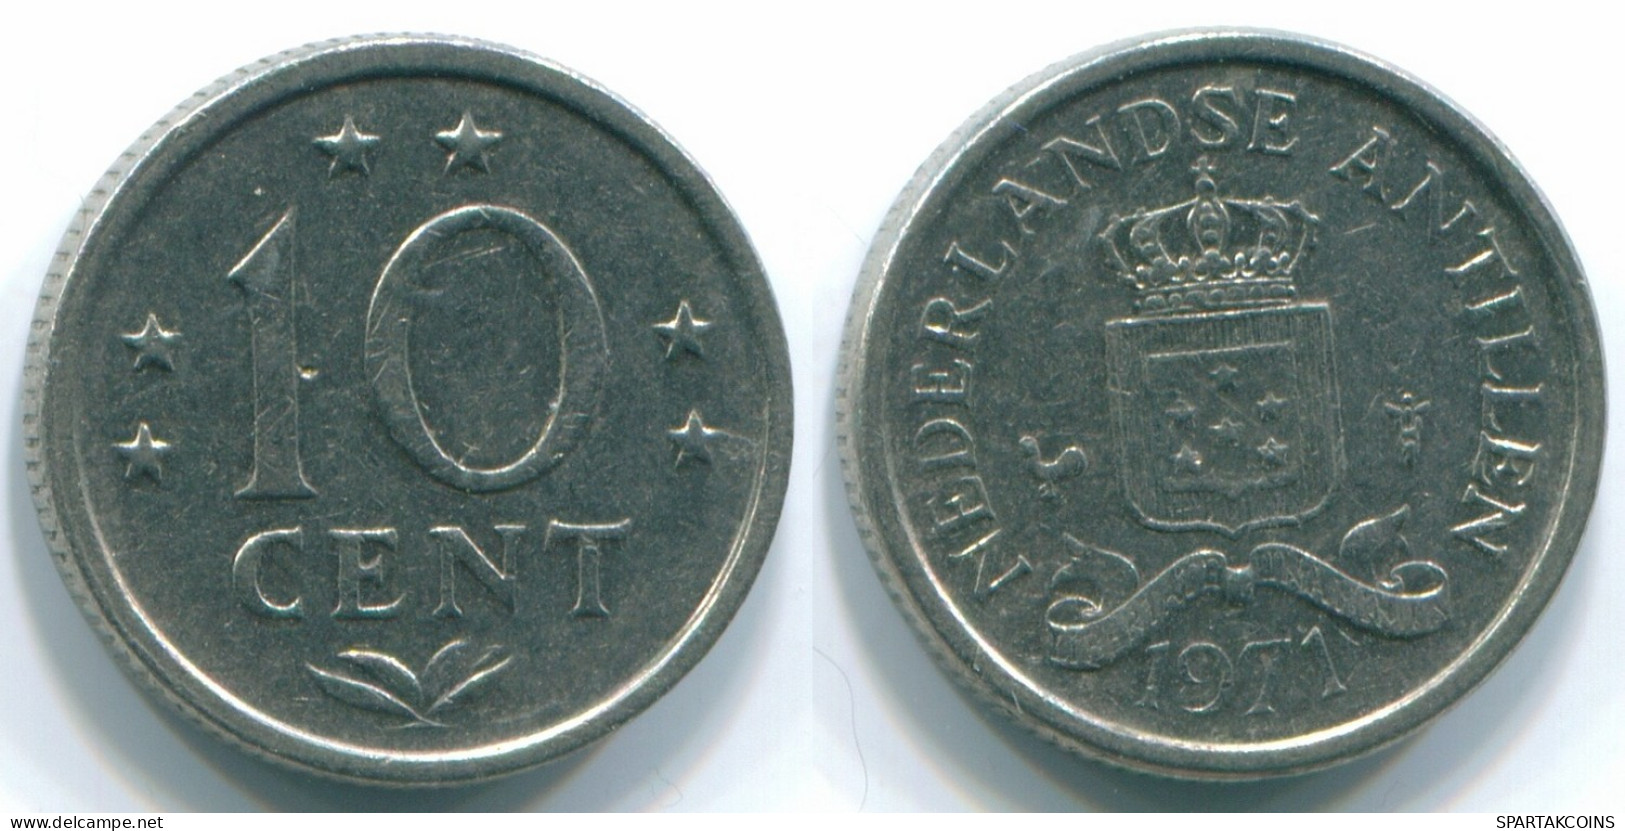 10 CENTS 1971 NETHERLANDS ANTILLES Nickel Colonial Coin #S13448.U.A - Netherlands Antilles